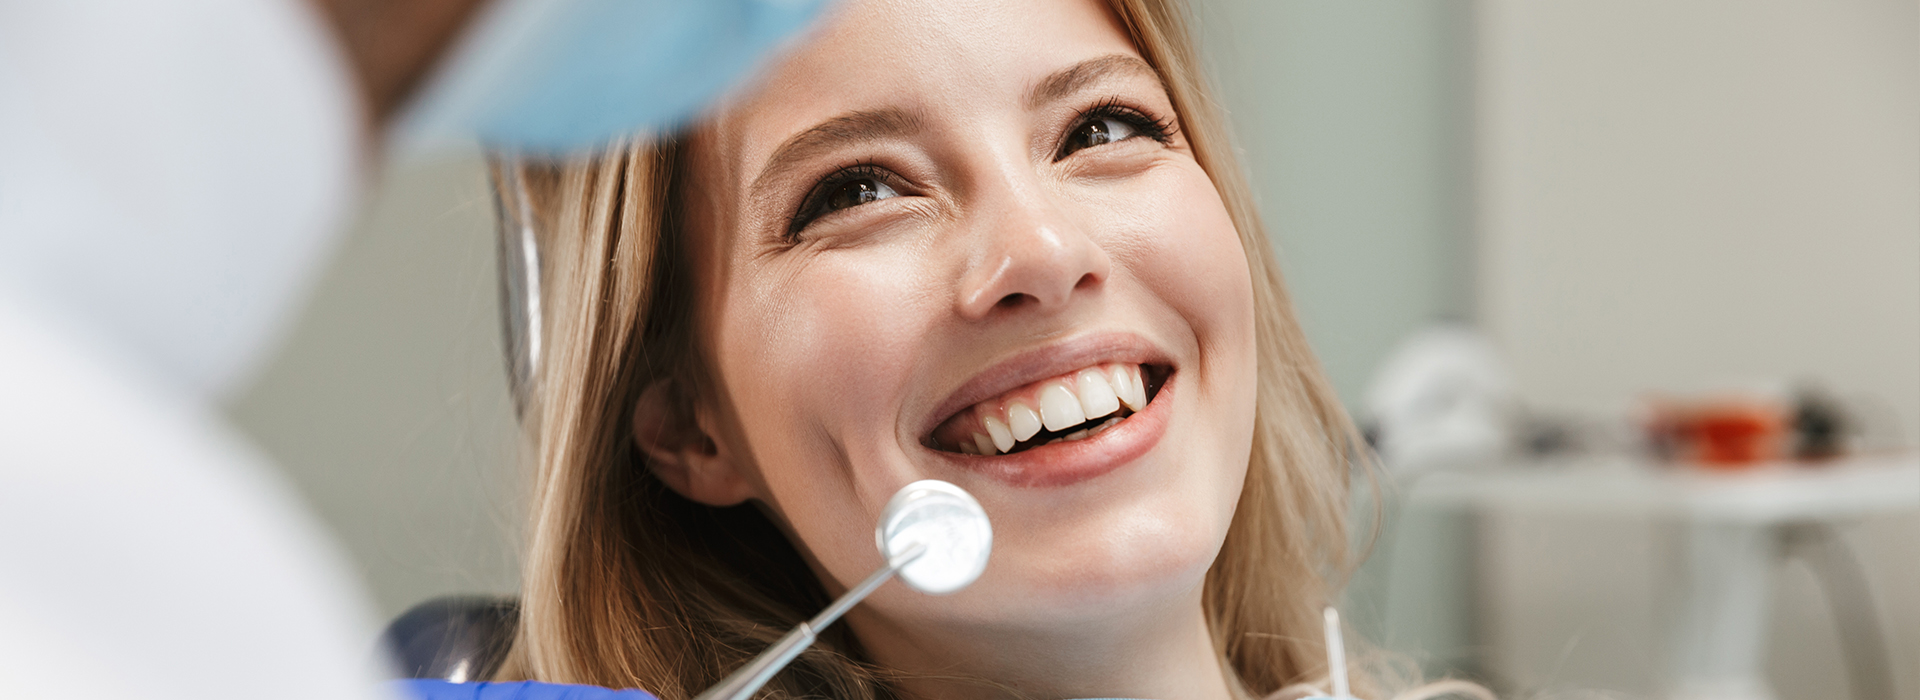 Pikesville Family Dentistry | Dental Fillings, Oral Cancer Screening and Dental Bridges